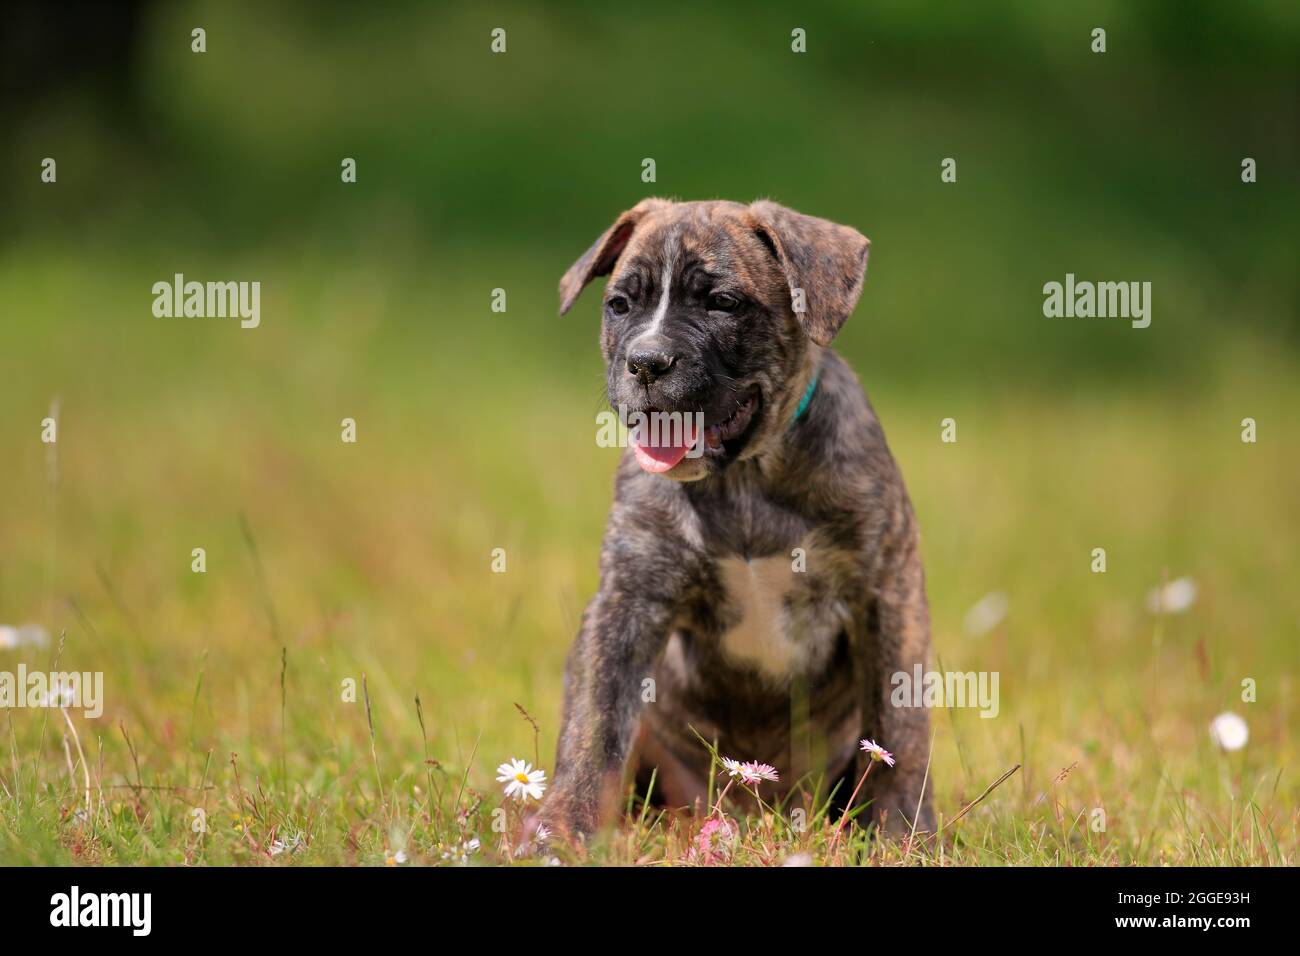 Cane Corso Boxer mix Domestic dog (Canis lupus familiaris), puppy sitting in the grass, Rhineland-Palatinate, Germany Stock Photo